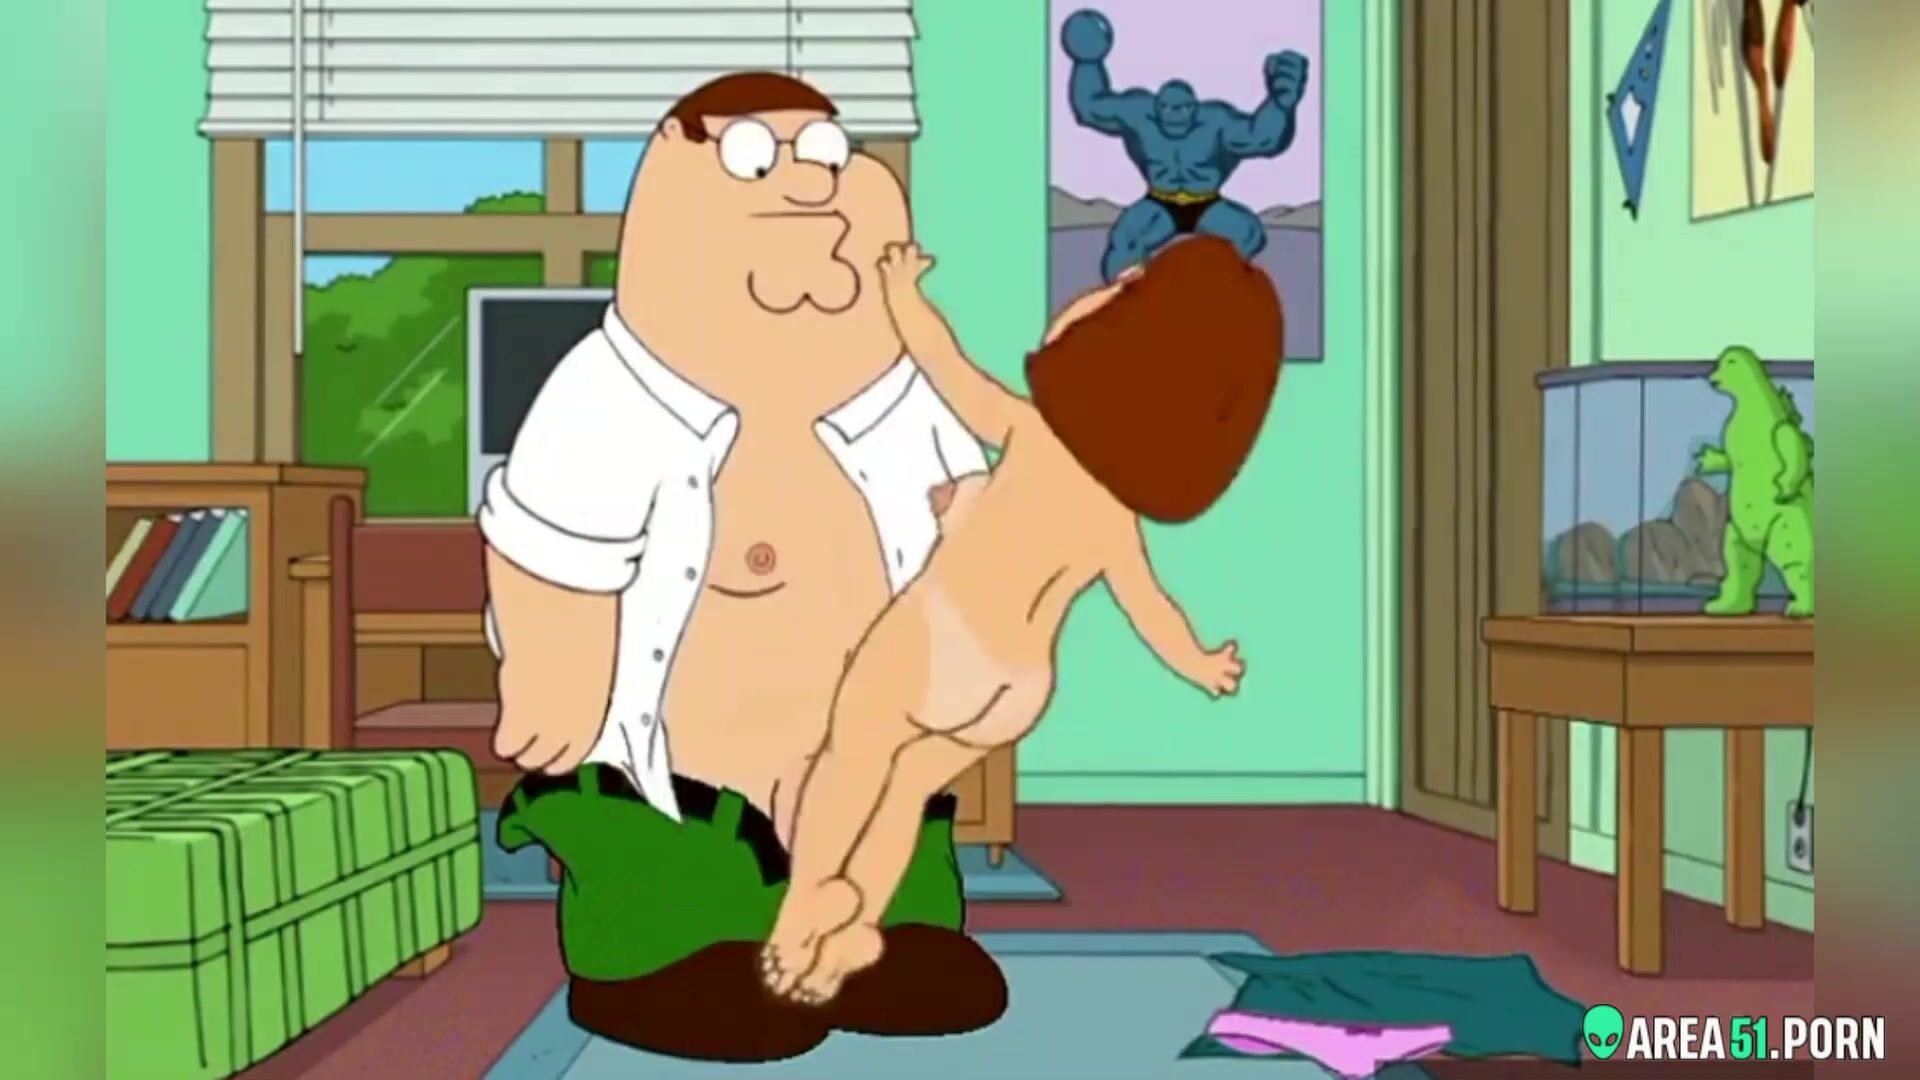 Big Brother Cartoon Porn - 3D incest cartoon! Sexy mommy Meg Griffin fucking her dad and brother |  AREA51.PORN